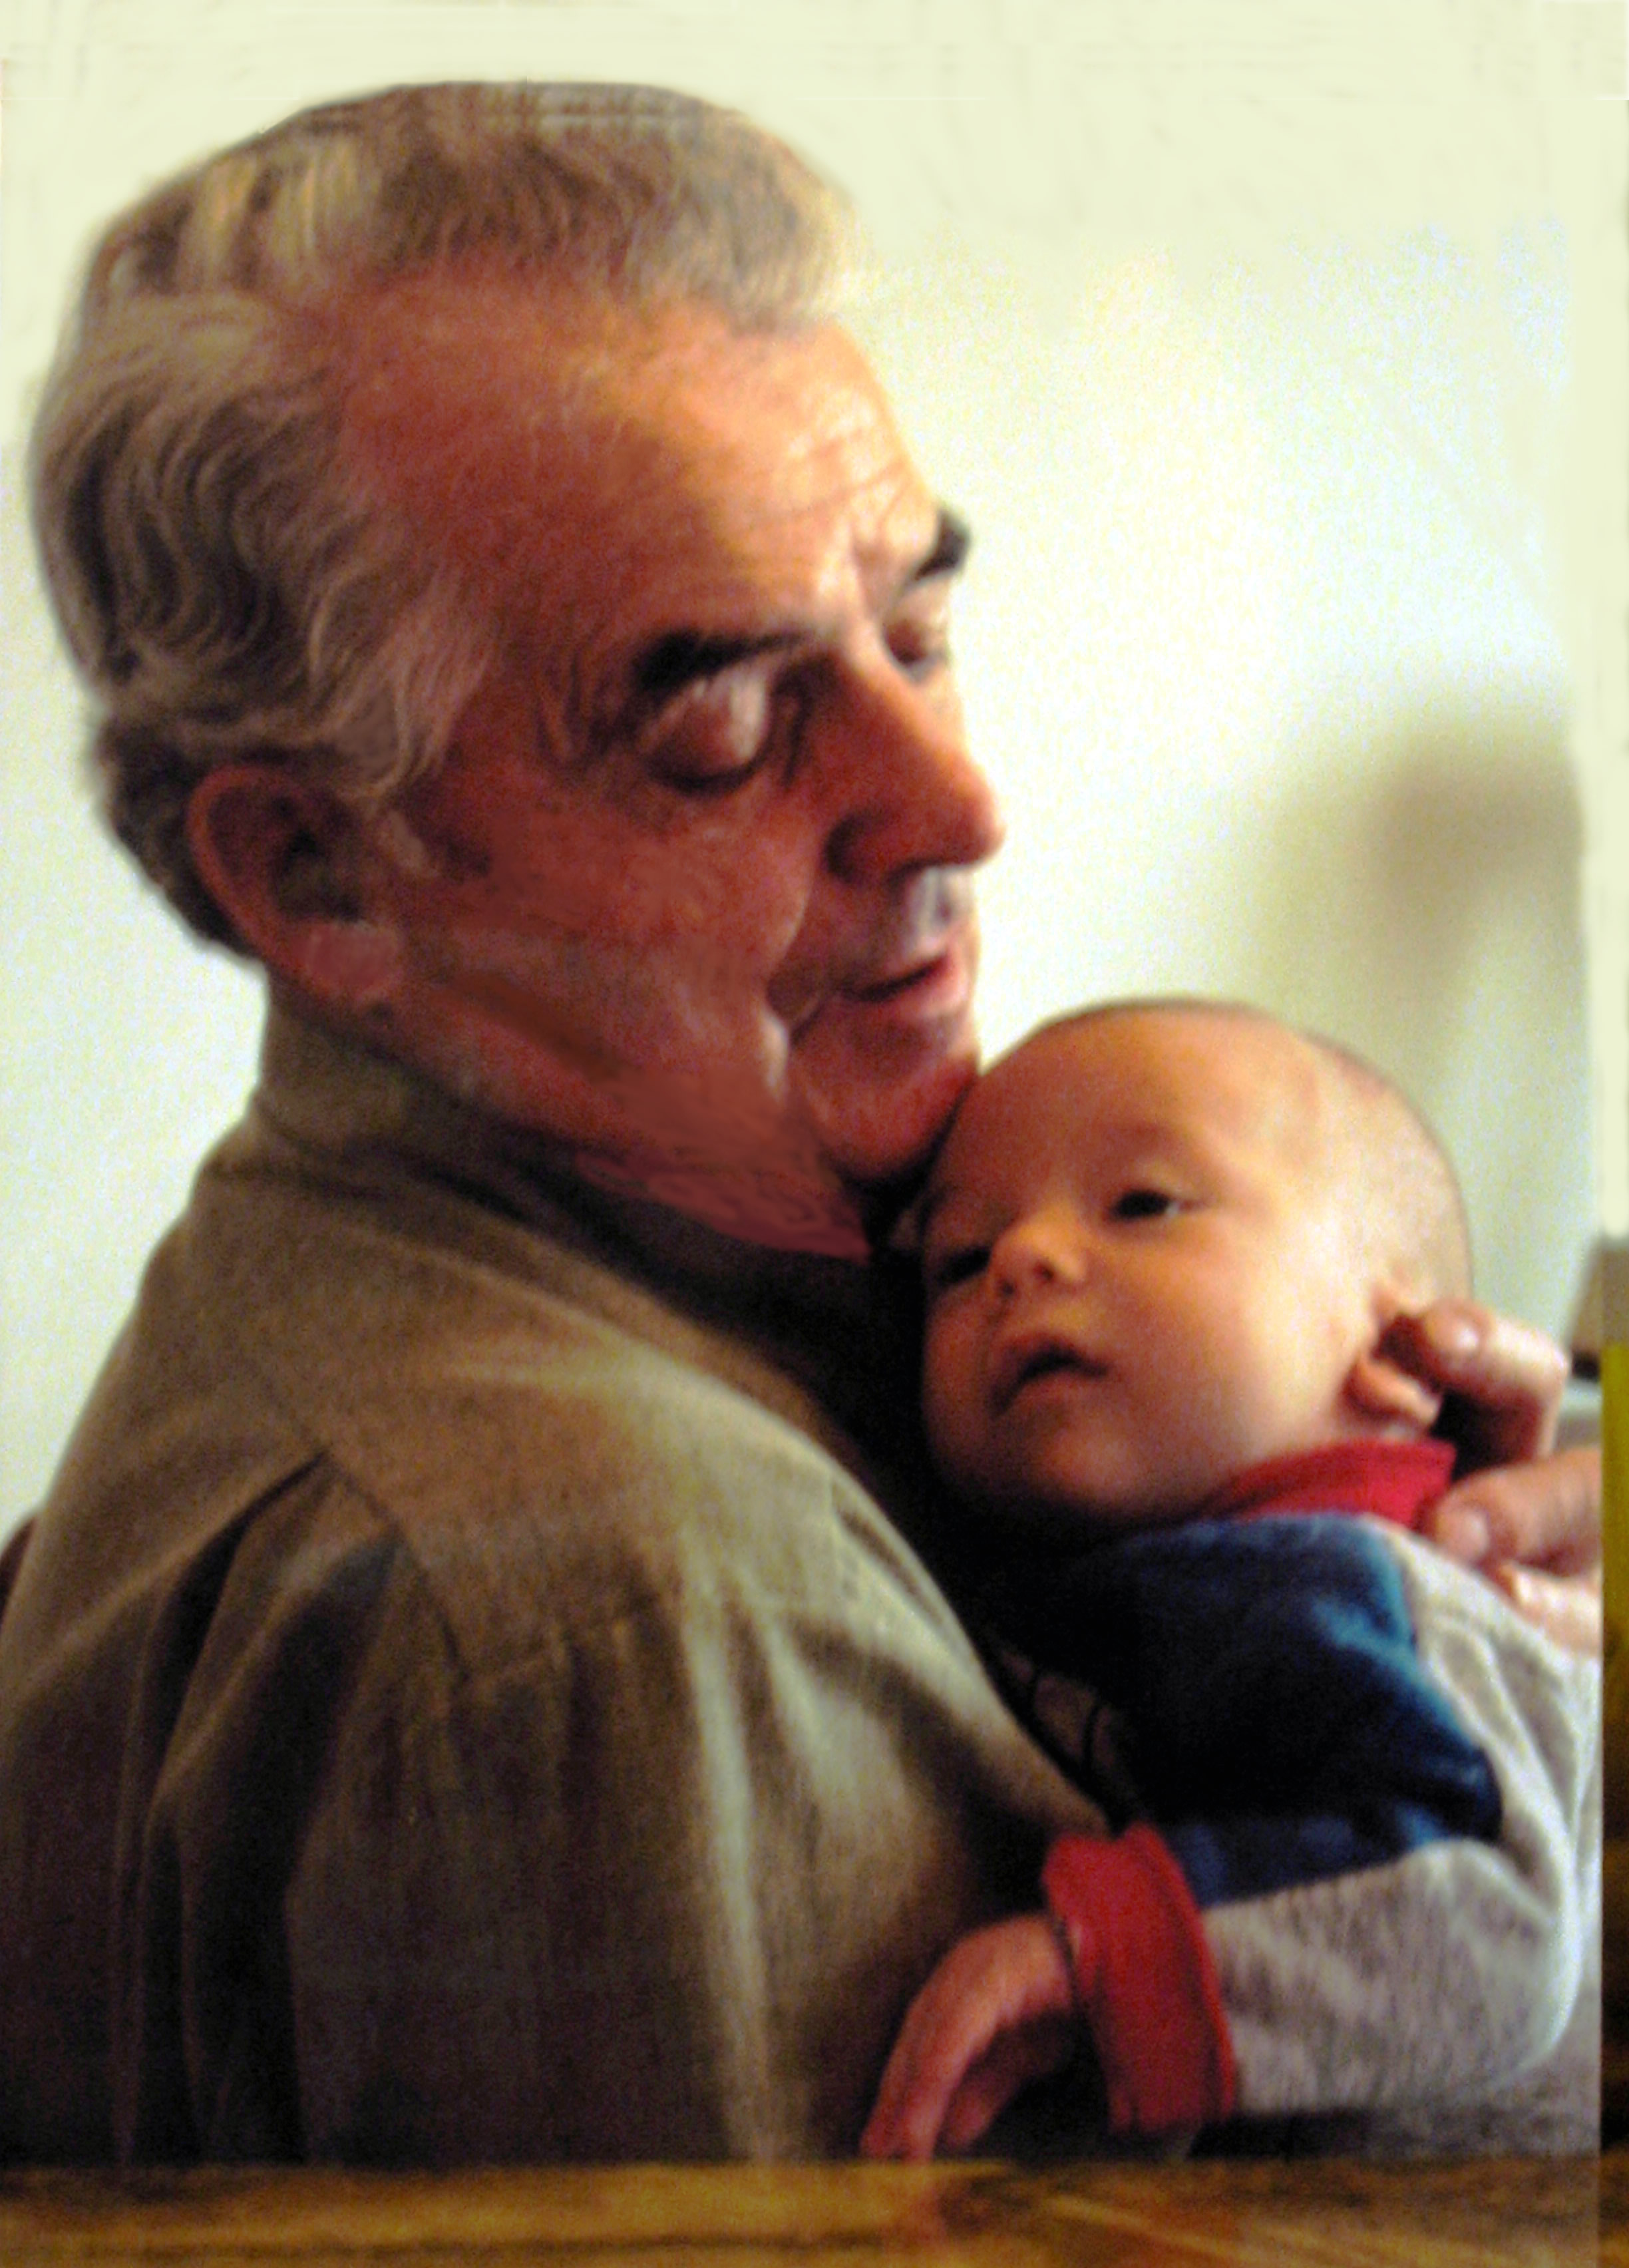 Walter holding his grandson